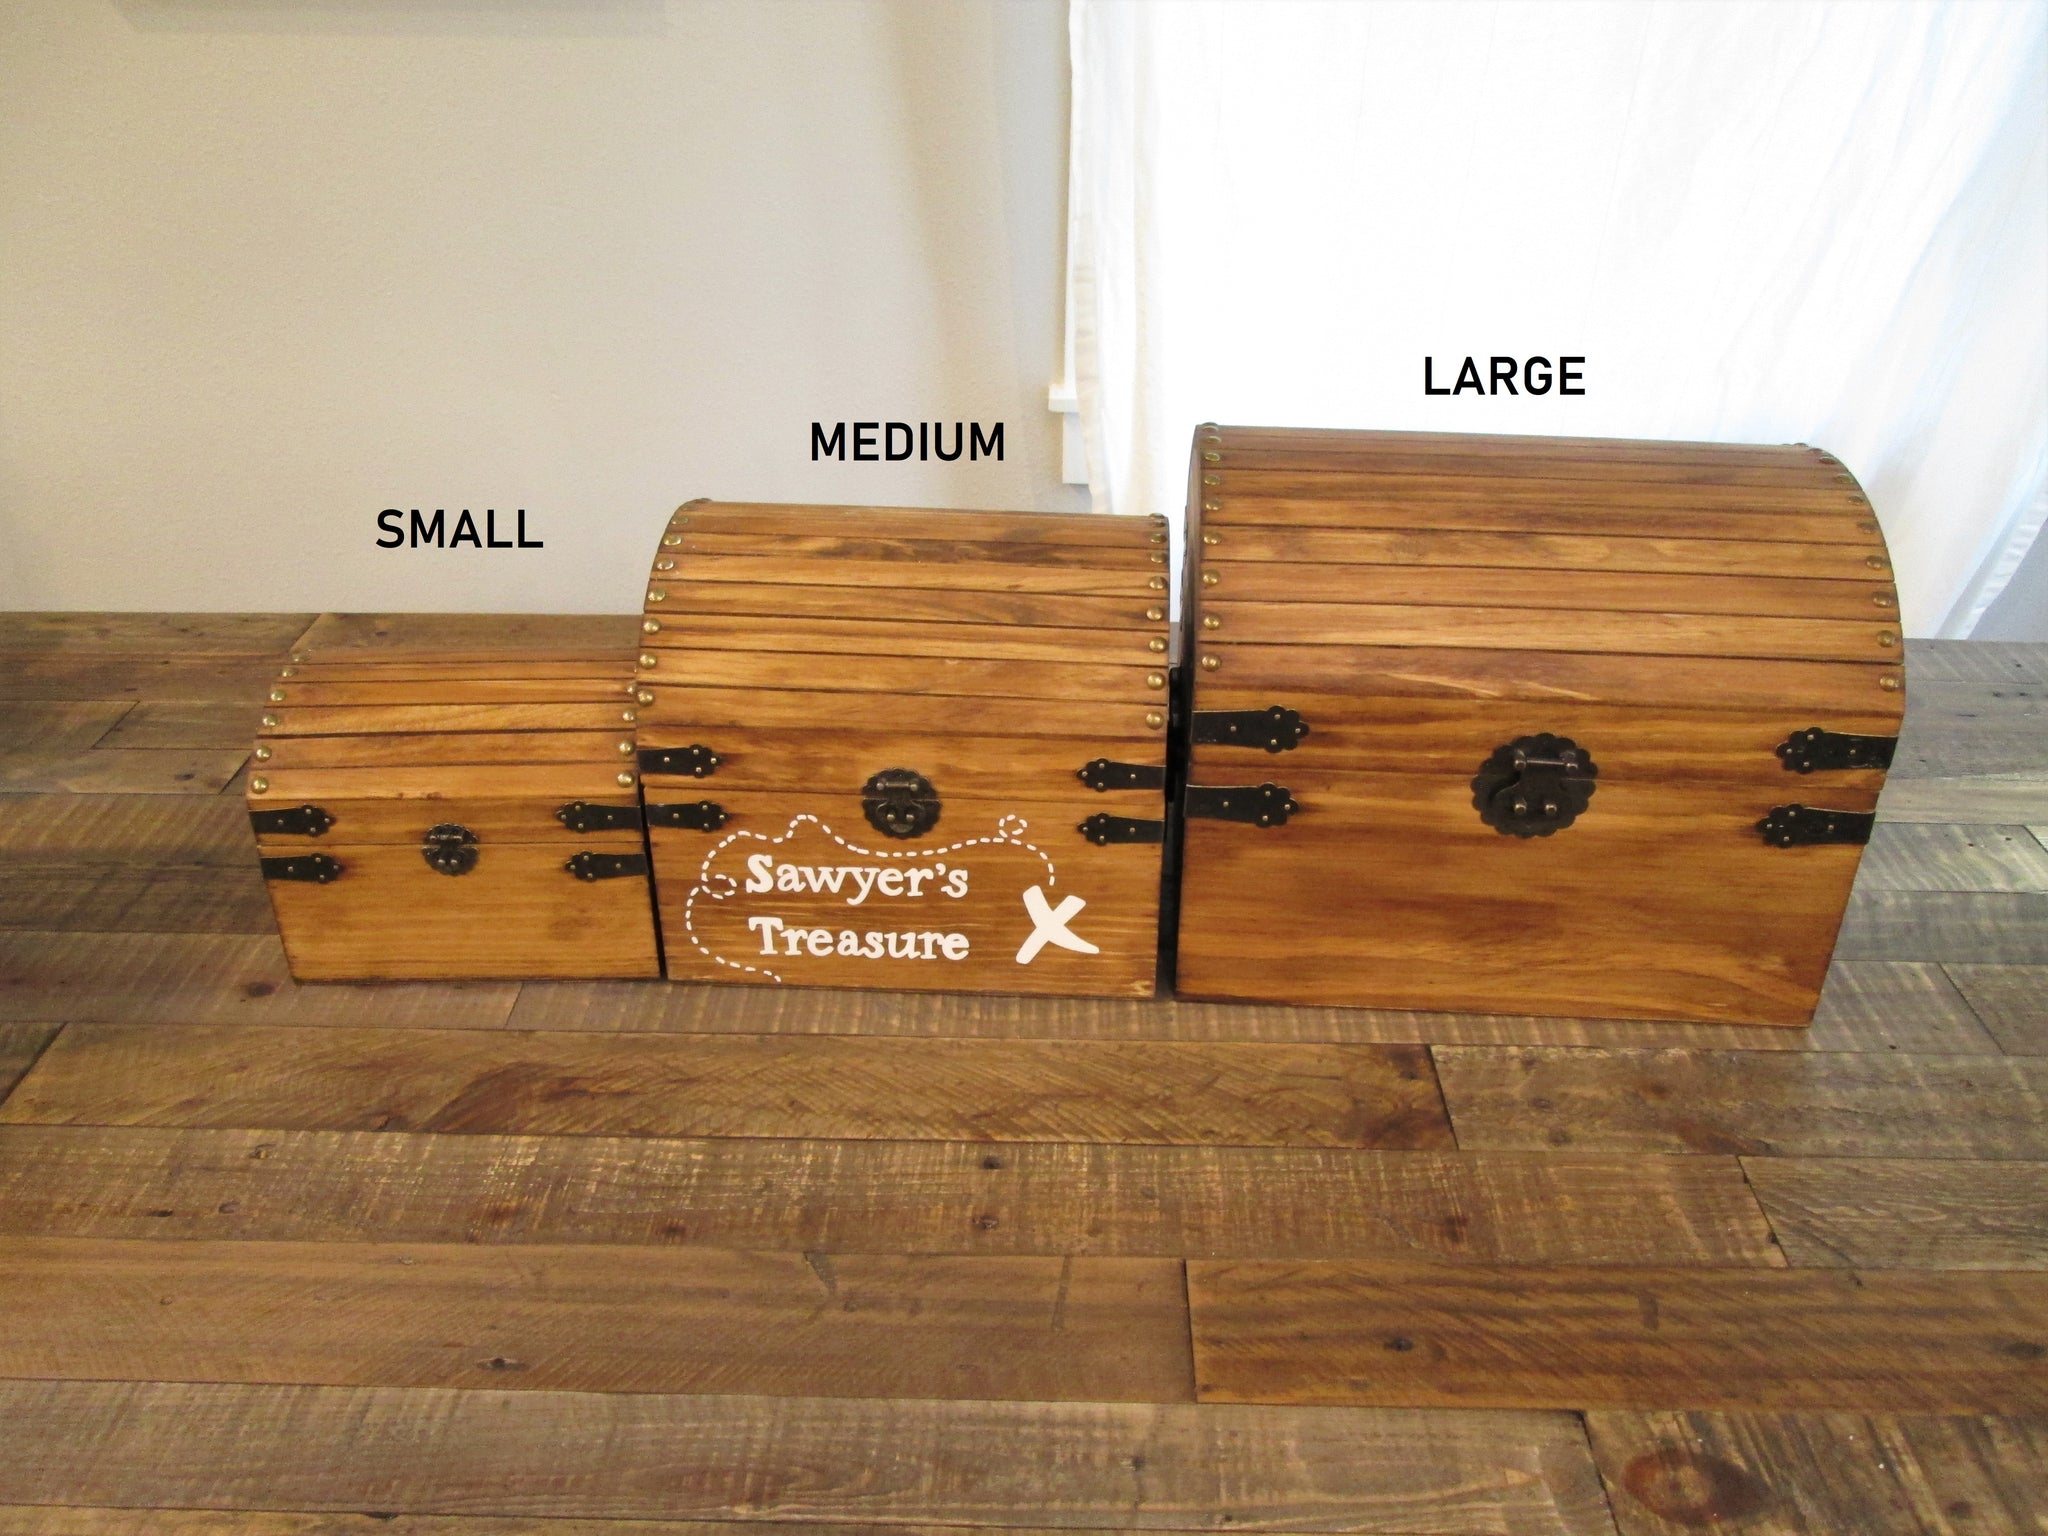 All the Best Low-Cost Treasure Box Prizes You Can Buy on